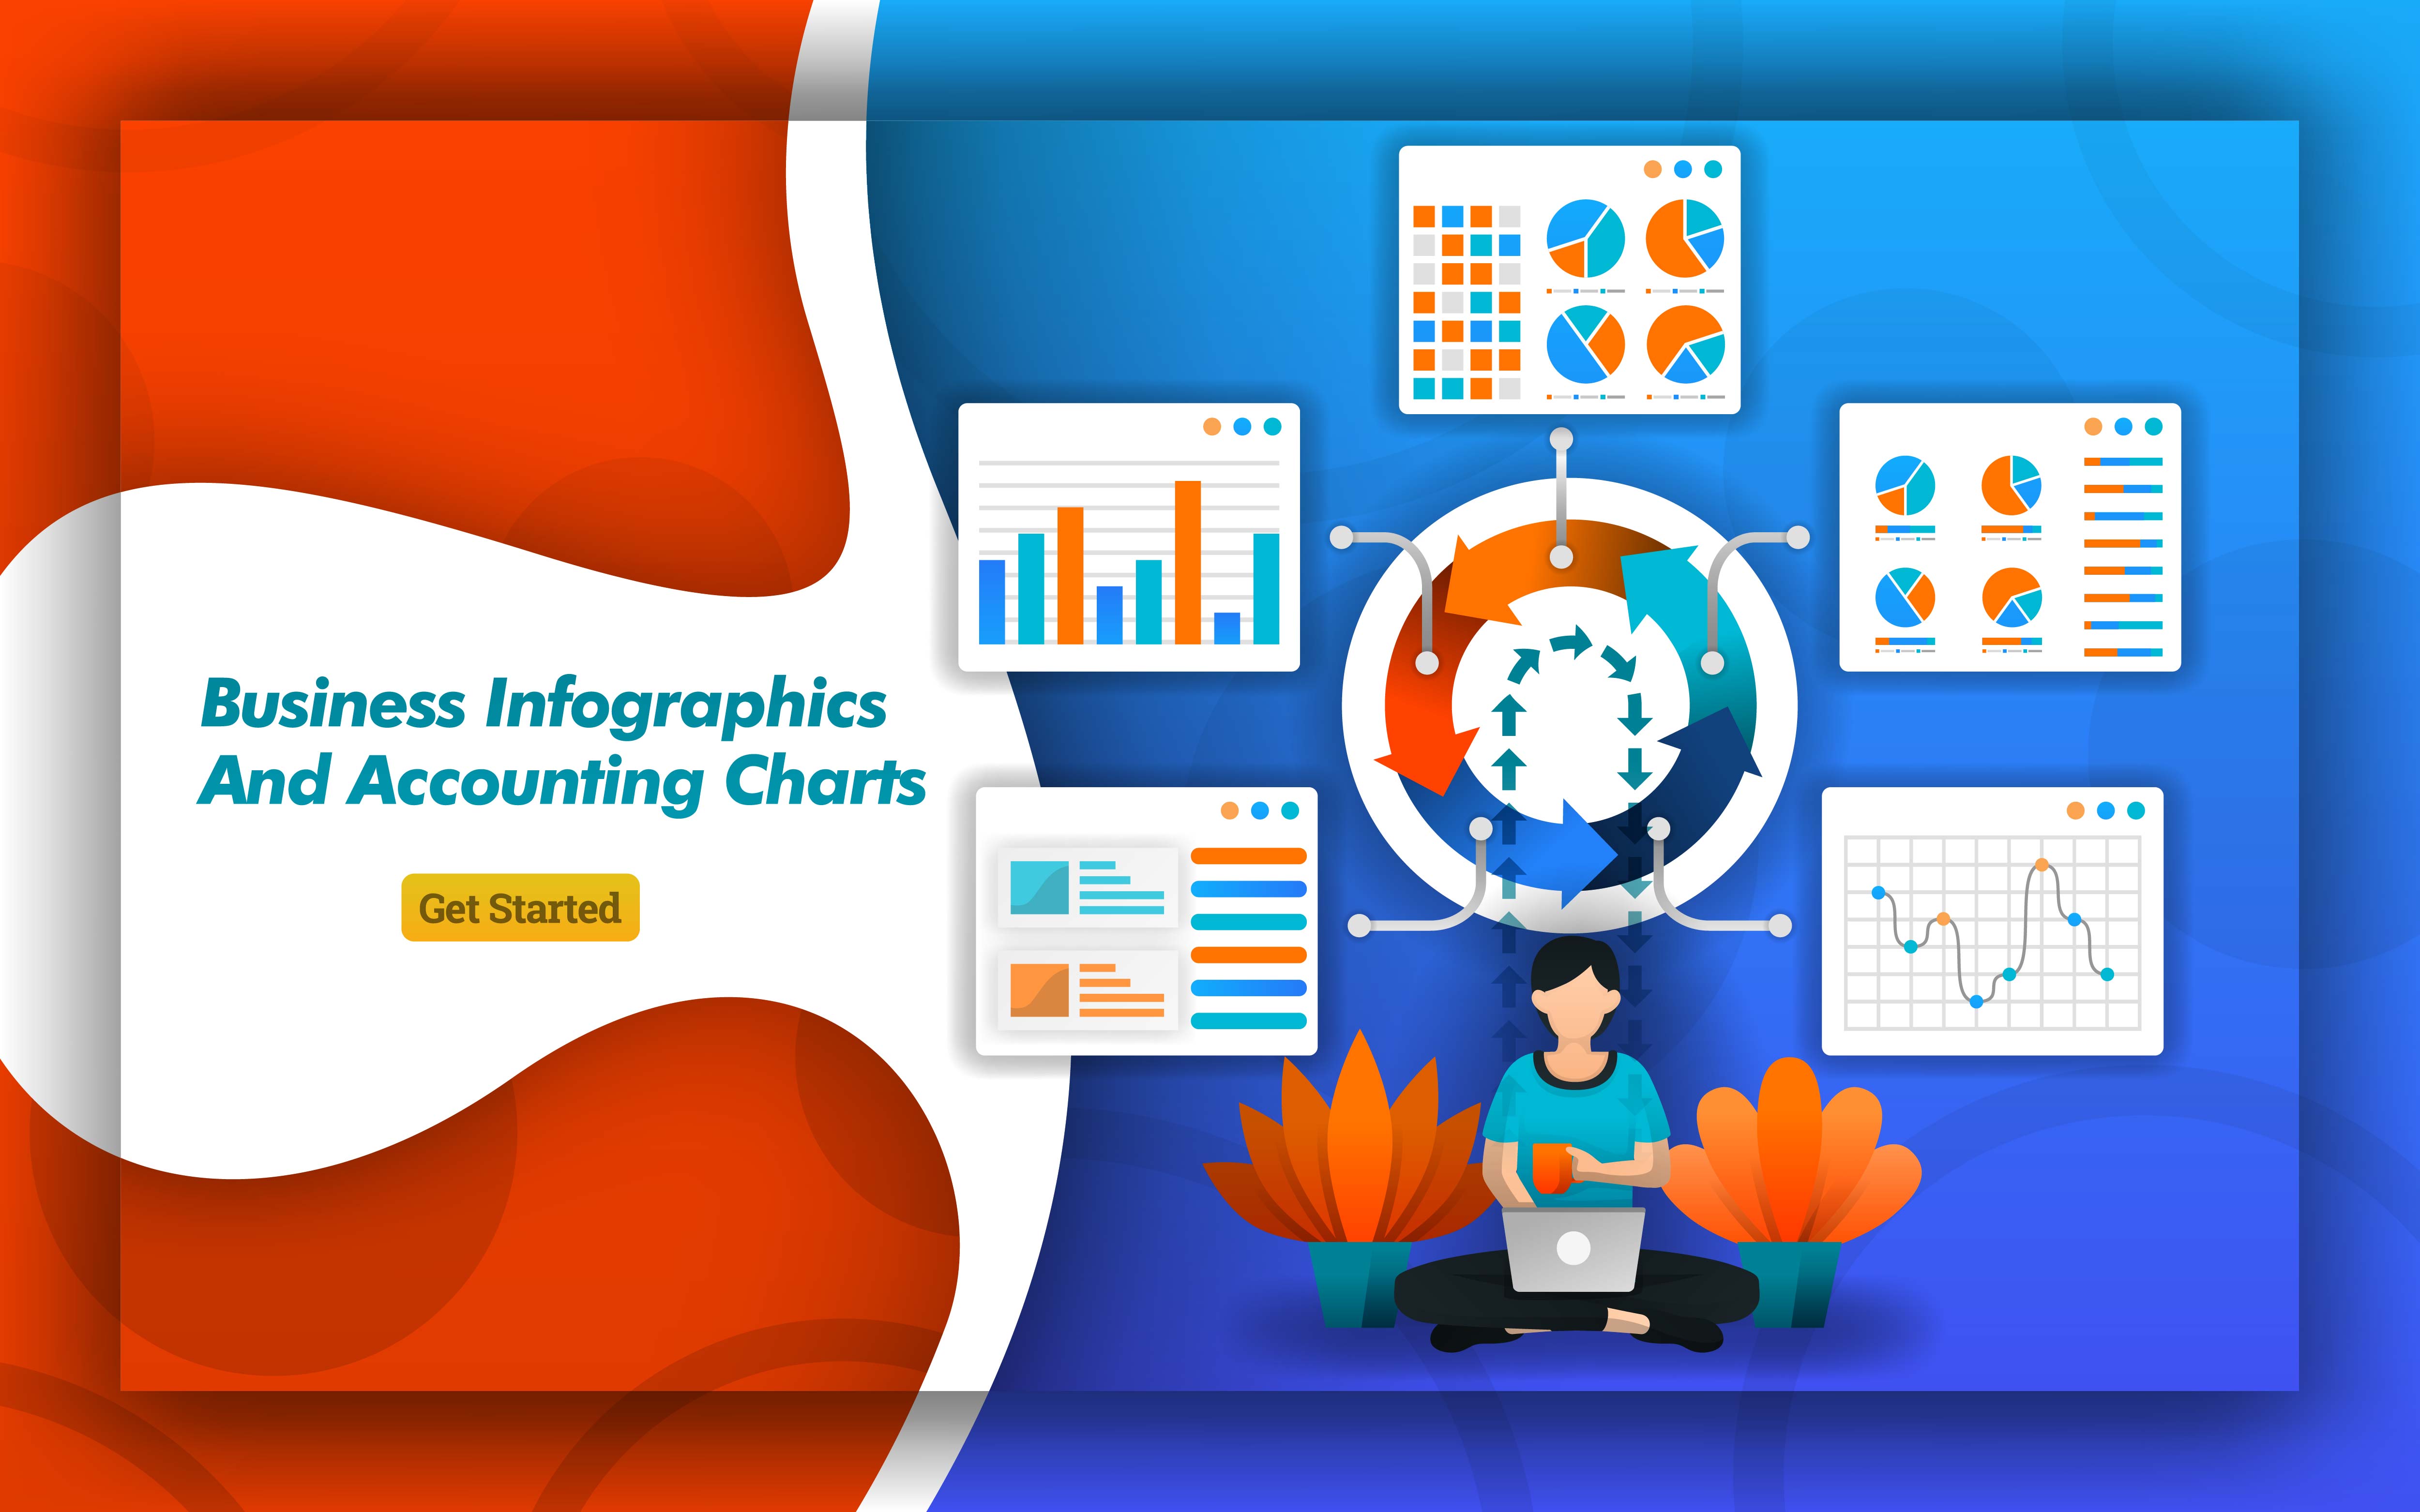 Business Infographic And Accounting Chart Design Packages For The